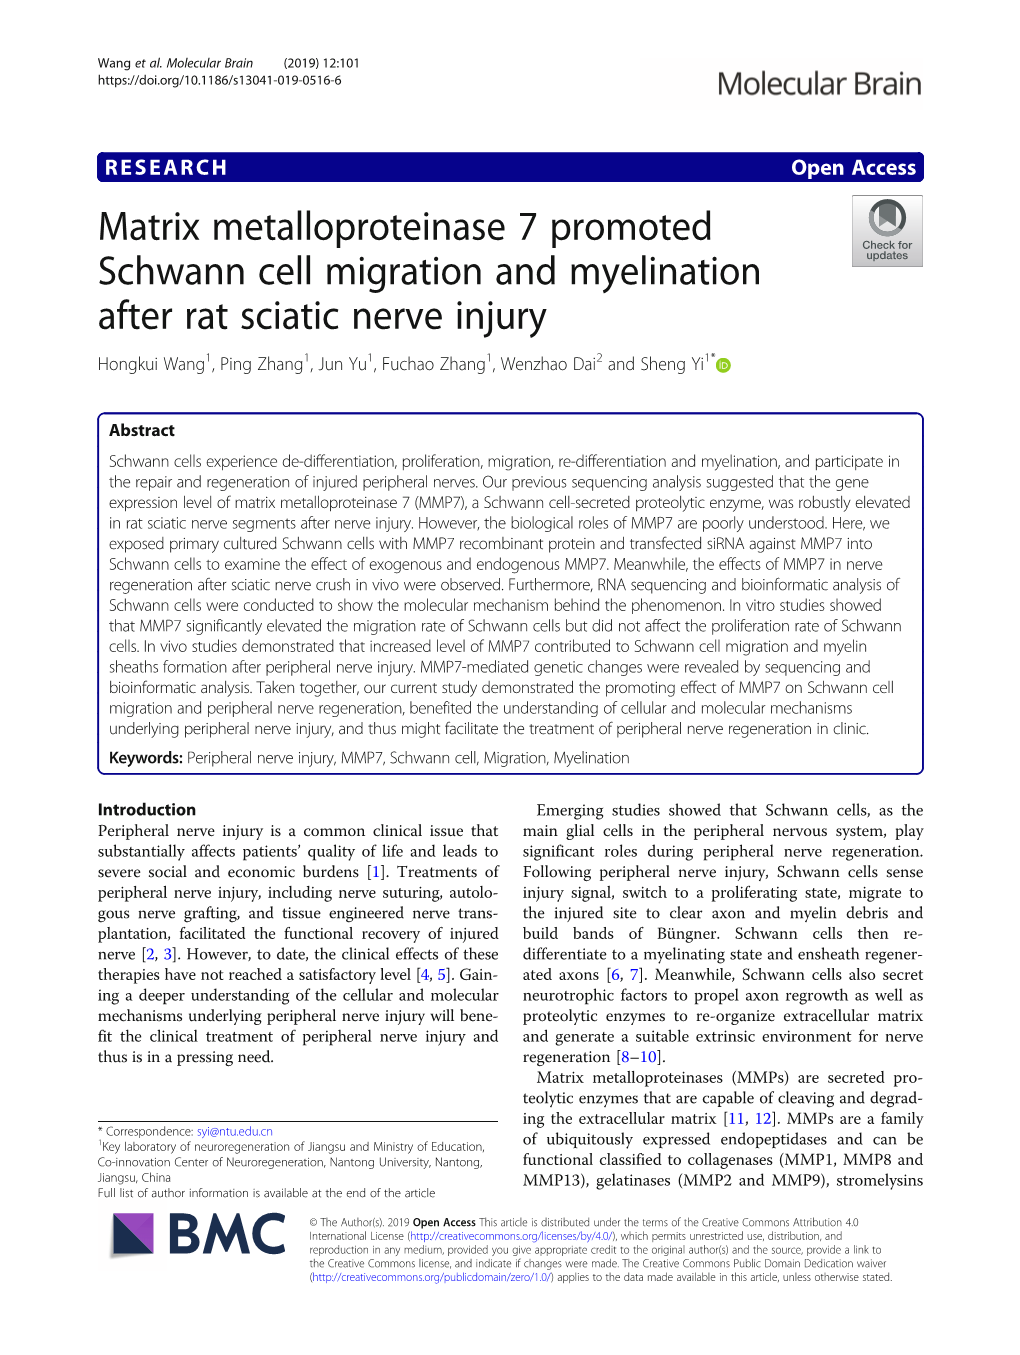 Matrix Metalloproteinase 7 Promoted Schwann Cell Migration and Myelination After Rat Sciatic Nerve Injury